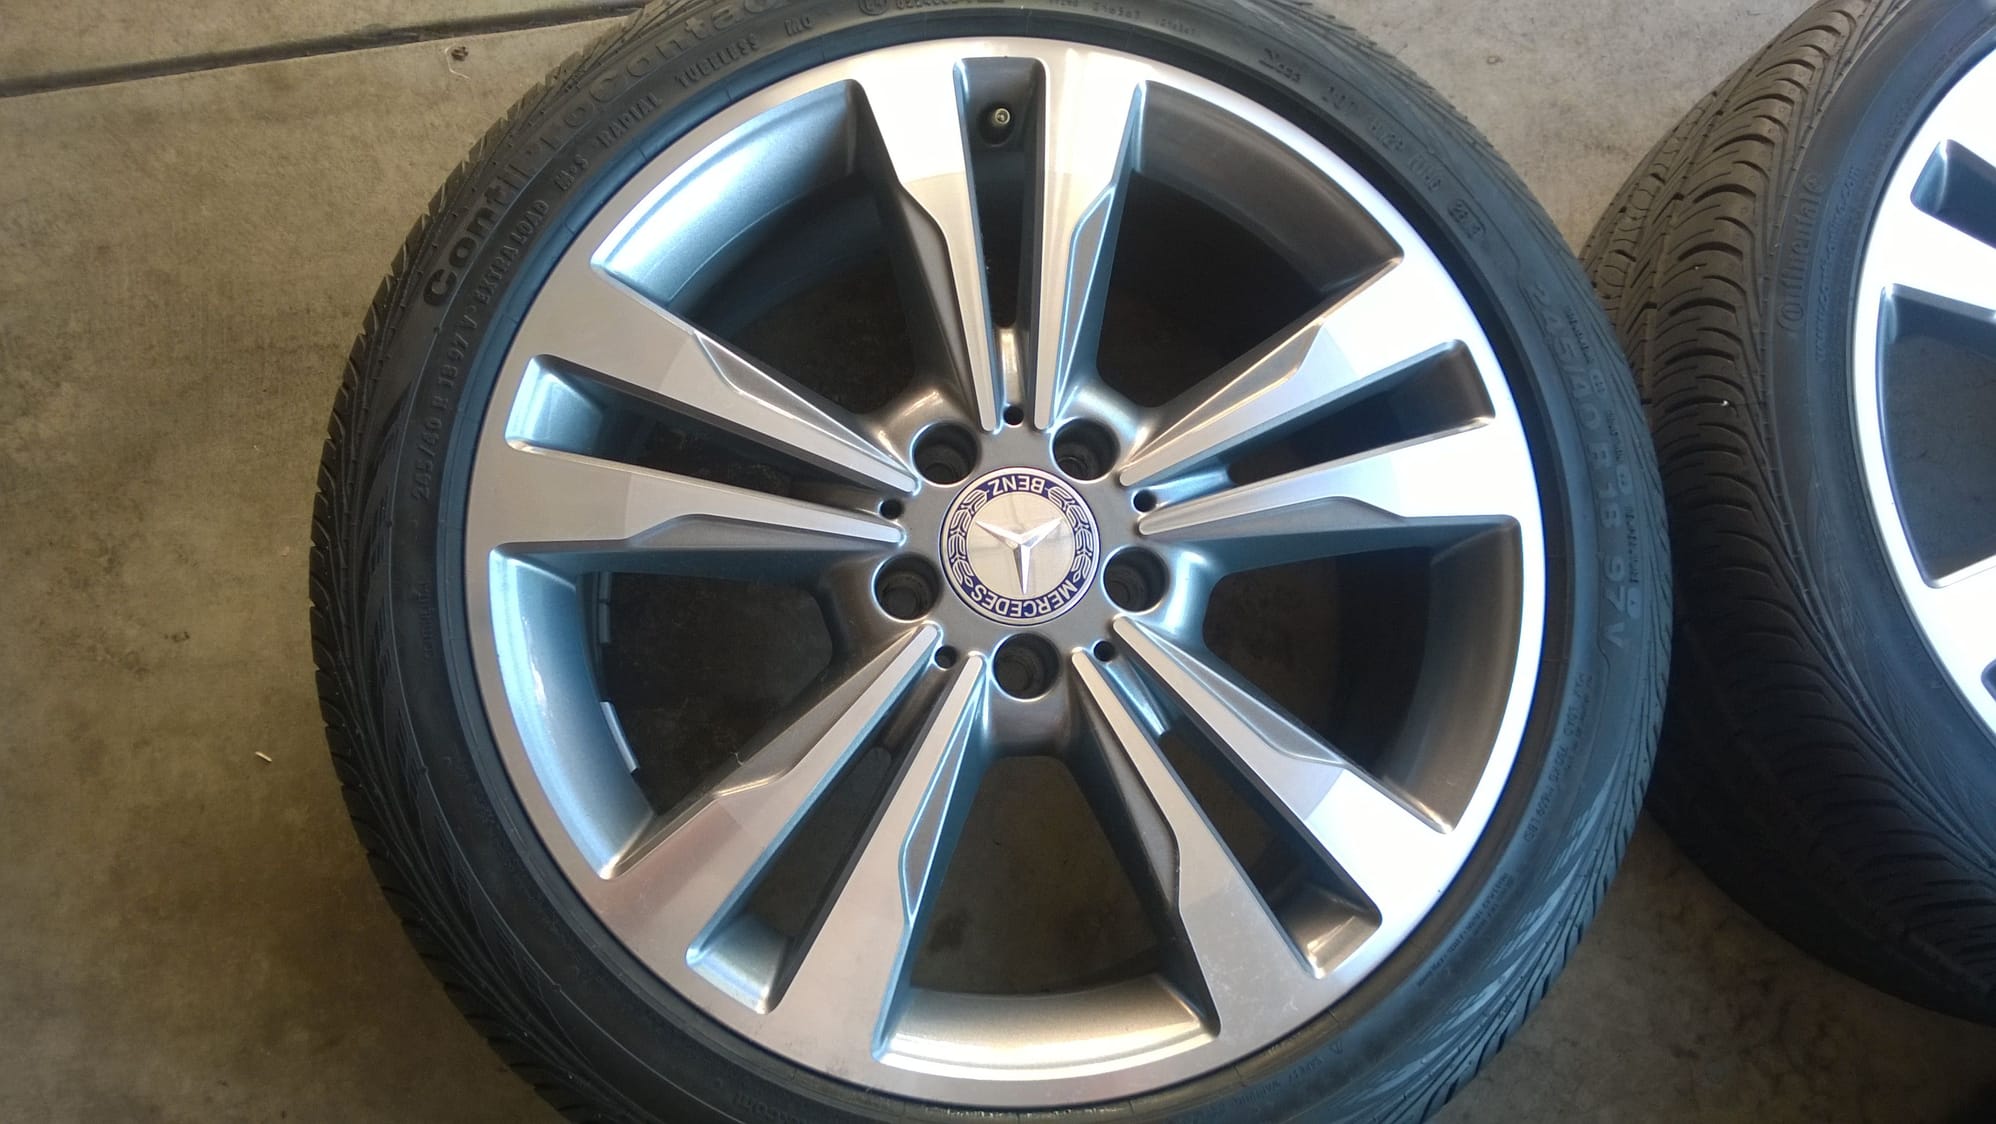 2014 Mercedes E350 OEM Wheels and tires for Sale - MBWorld.org Forums